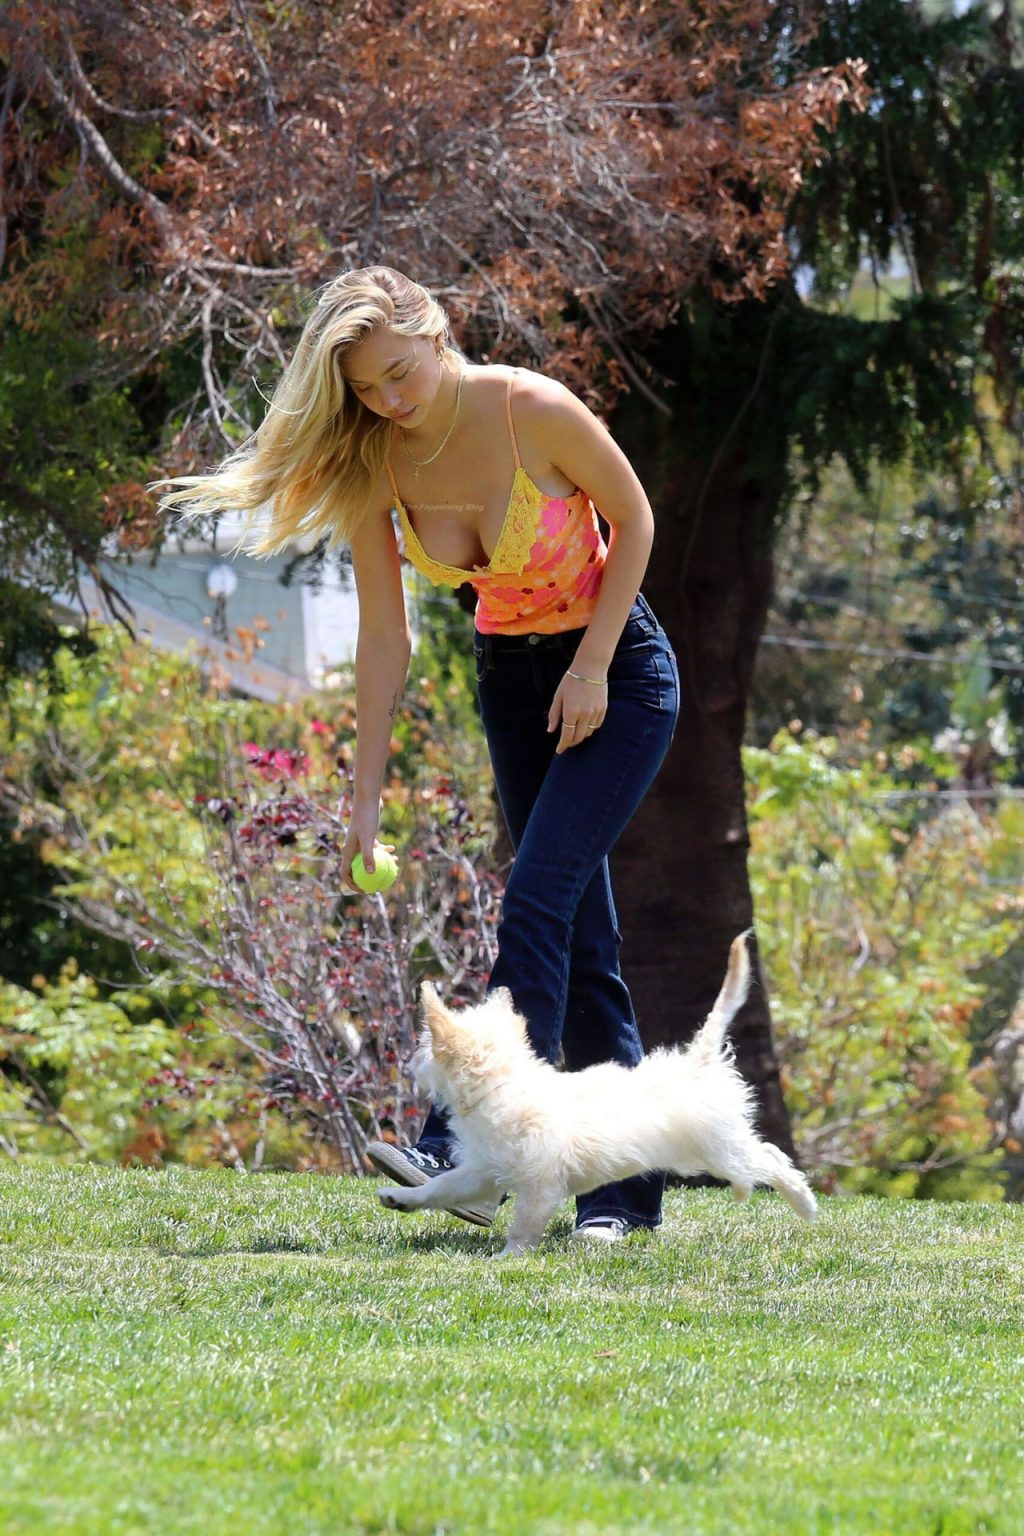 Alexis Ren and Her Adorable Dog Angel are Pictured in the Park (49 Photos)